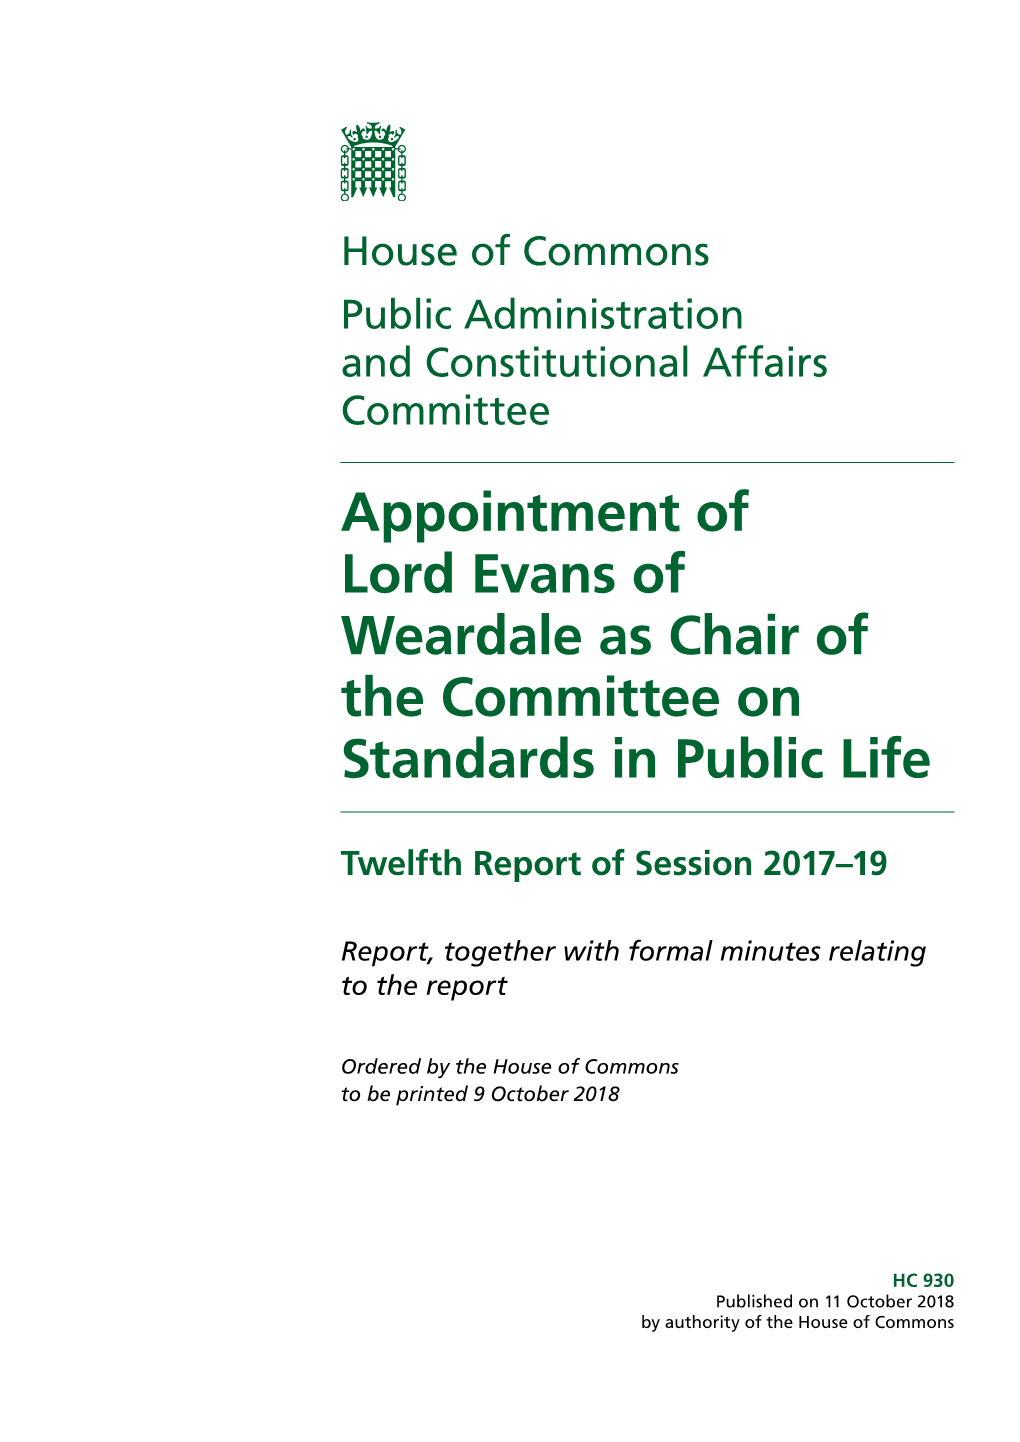 Appointment of Lord Evans of Weardale As Chair of the Committee on Standards in Public Life